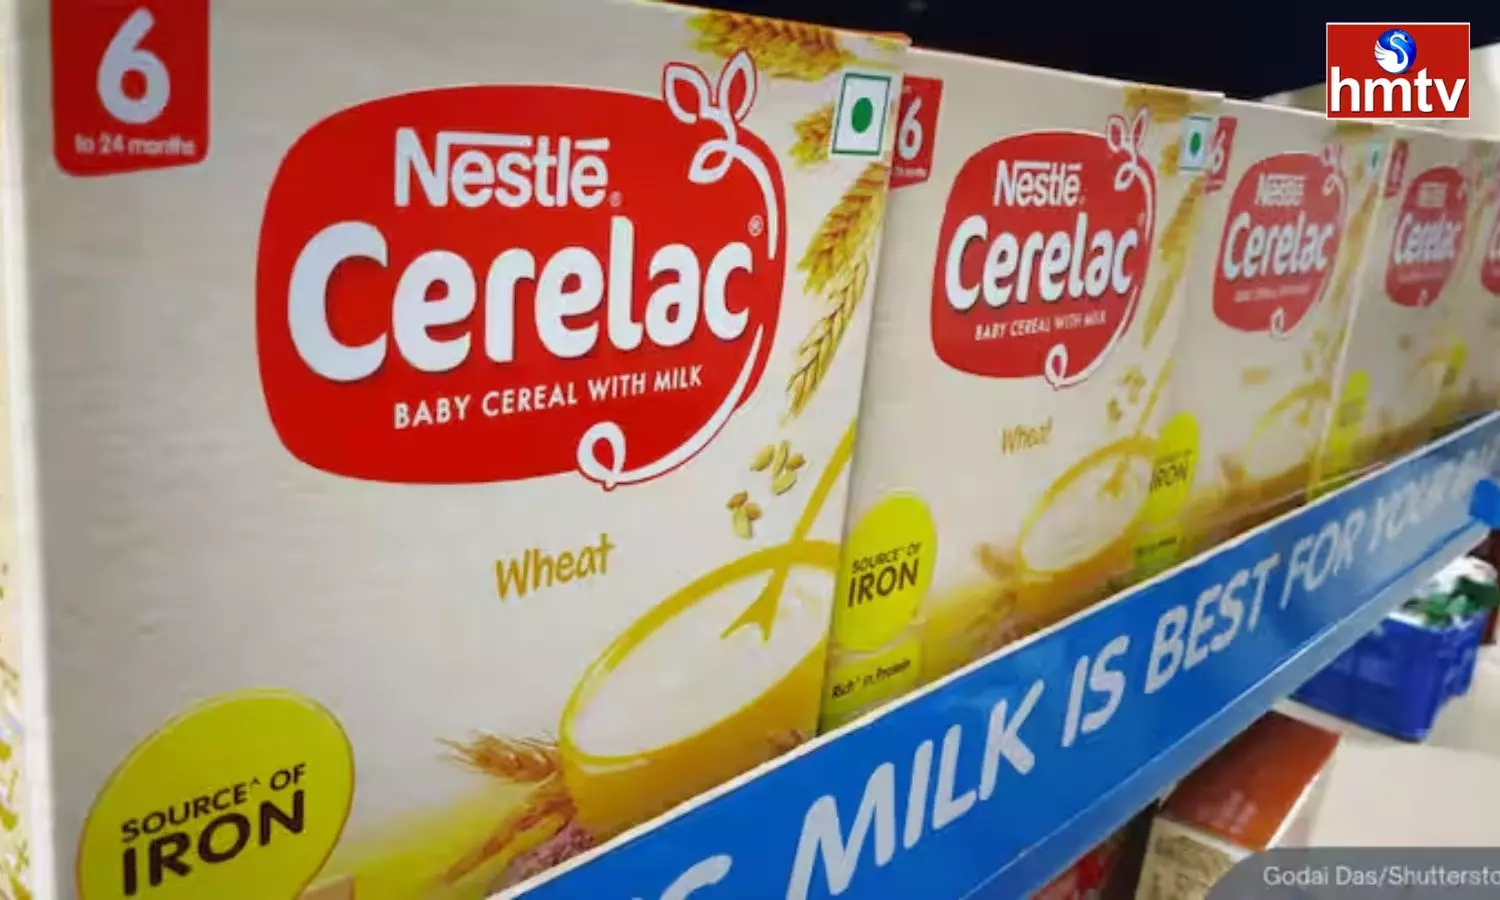 Are you Feeding Nestle Cerelac to Children be Careful